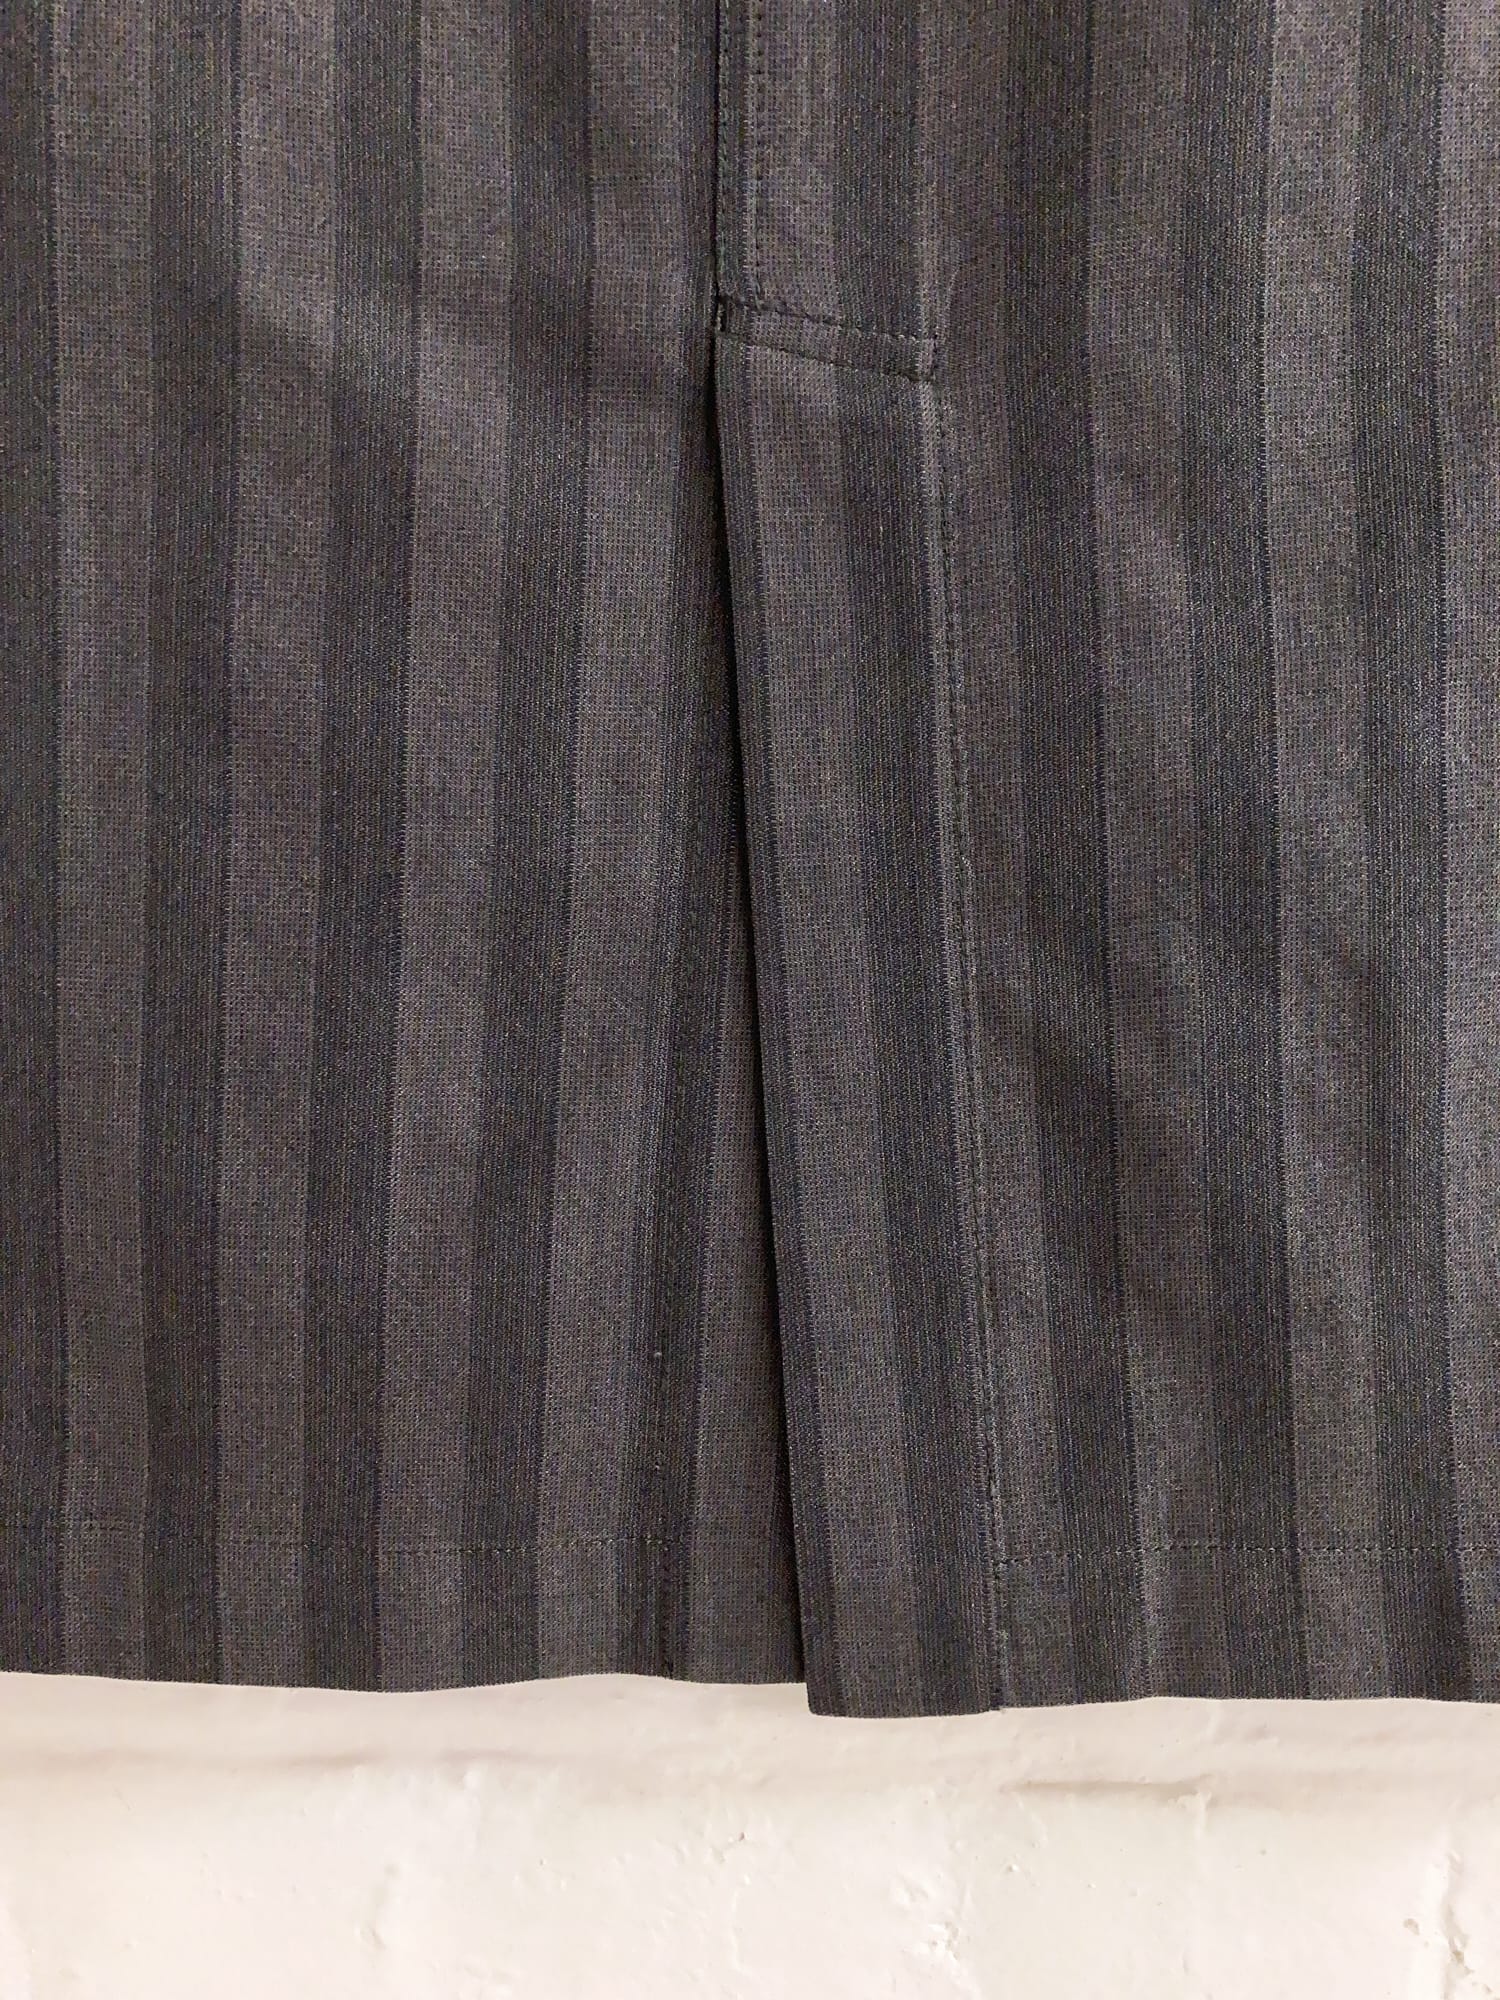 Tricot Comme des Garcons 1994 long grey striped wool skirt - M